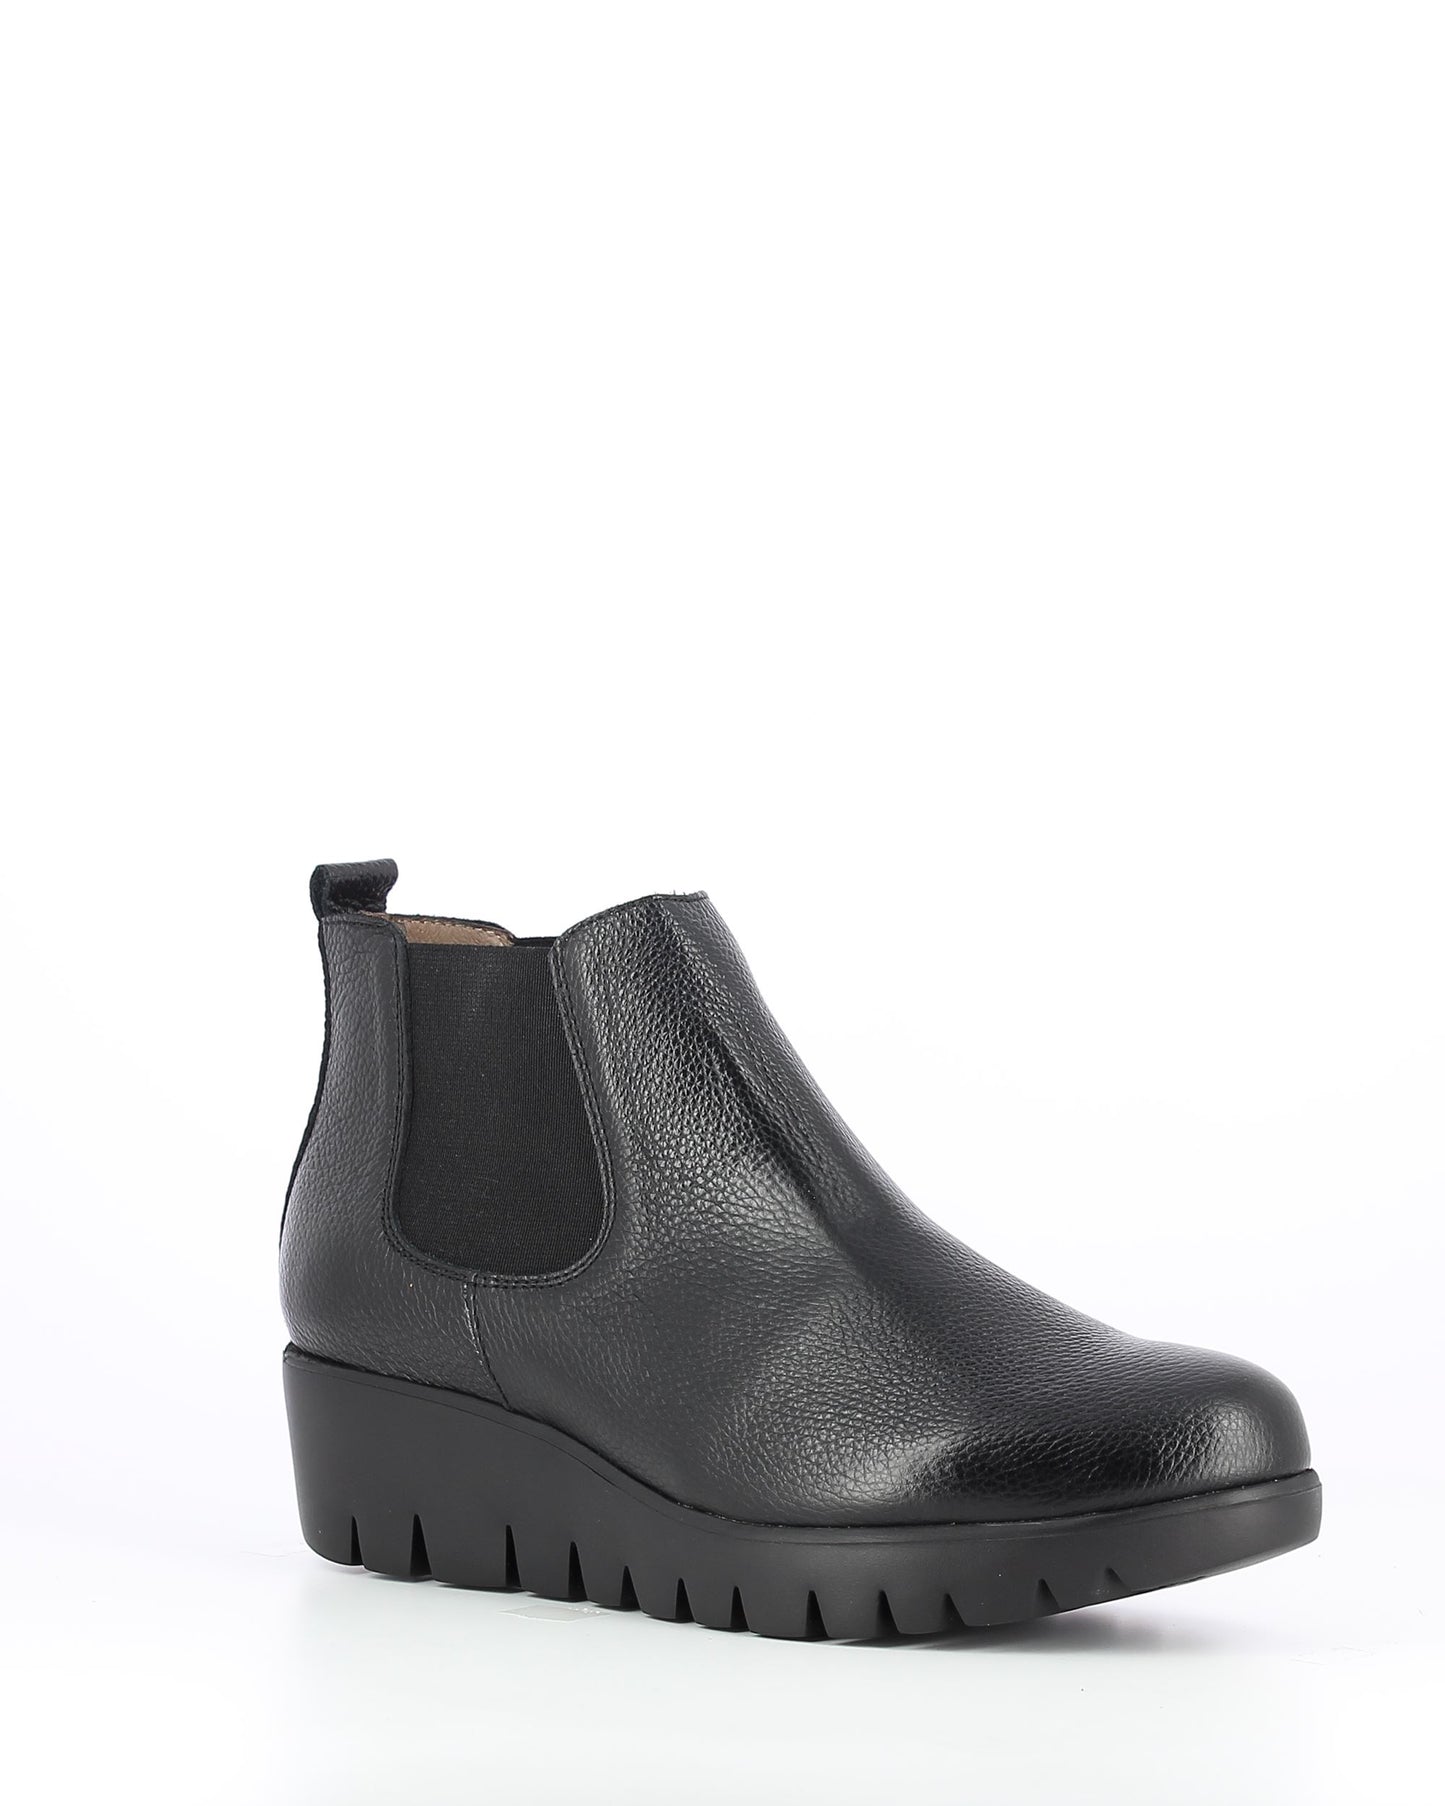 A black leather boot with a low, black wedge heel and black elastic side cut out is pictured in profile.